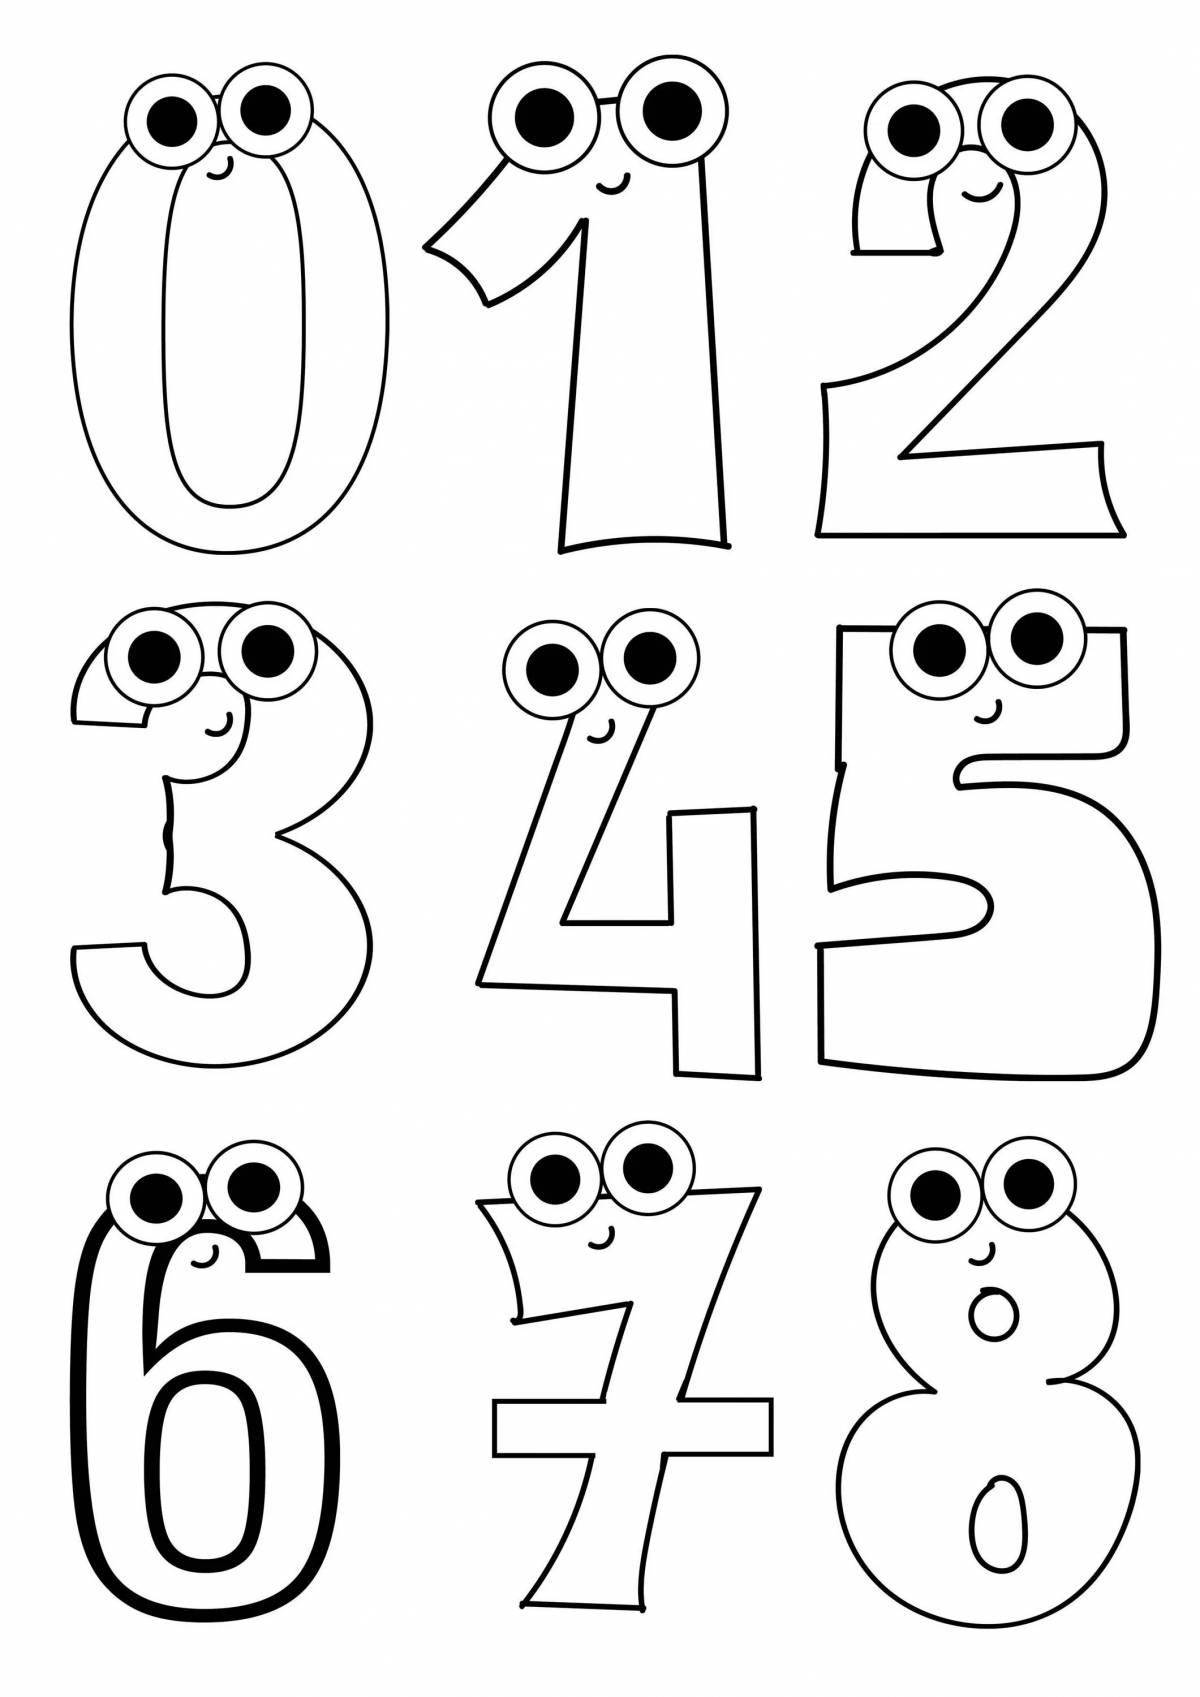 Fabulous numbers coloring book for kids